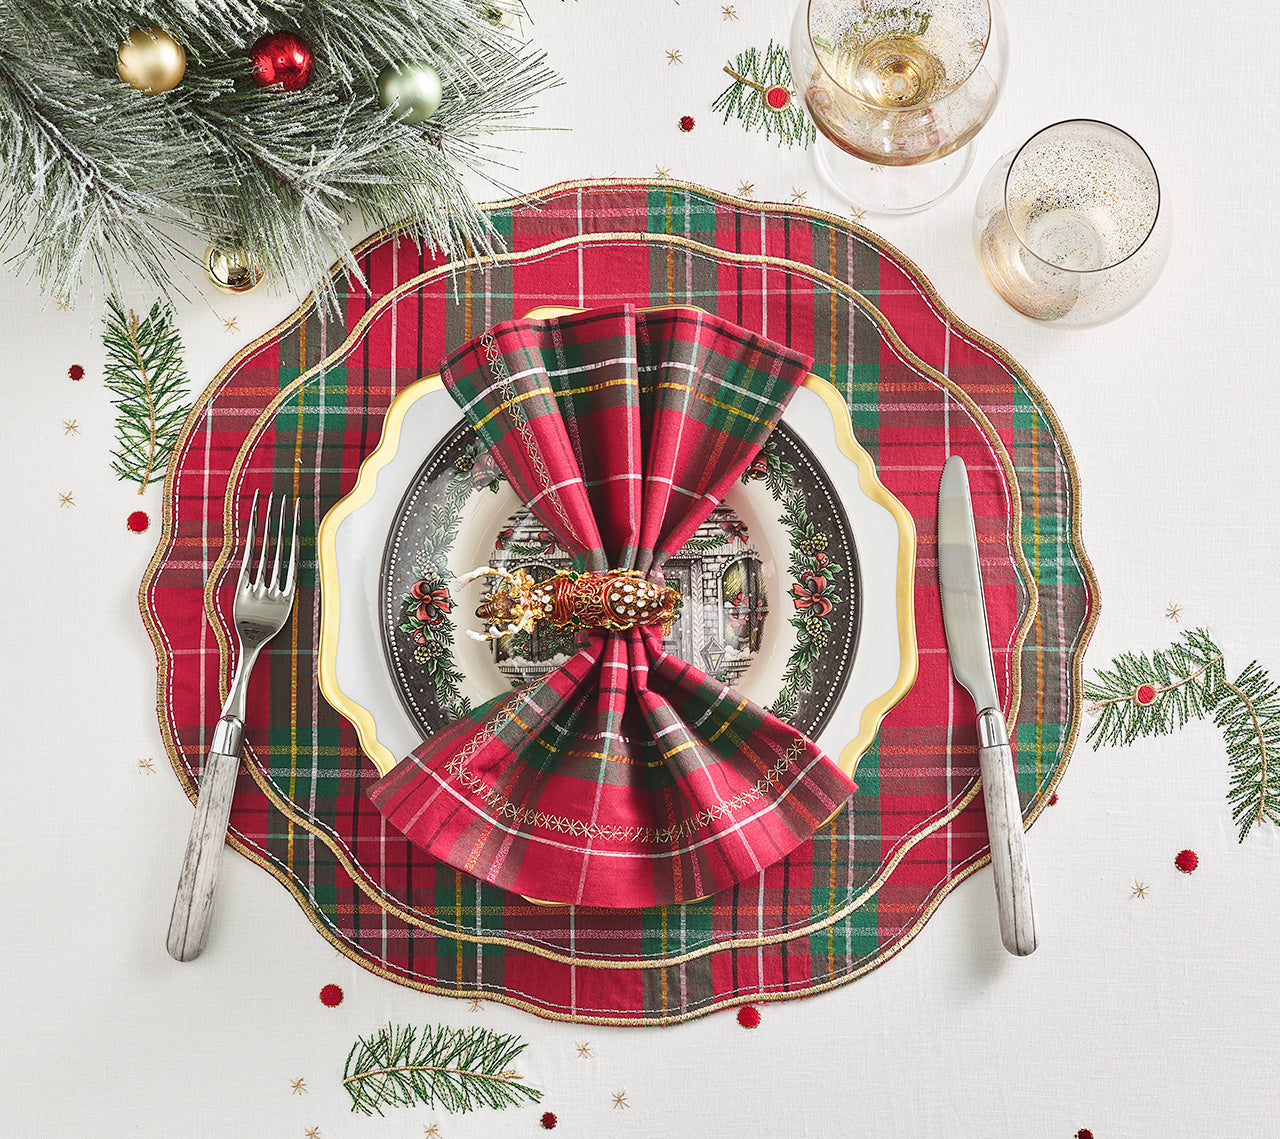 Set of 12 Cloth Napkins 16” Festive Red & Green Plaid With Gold  Stitching